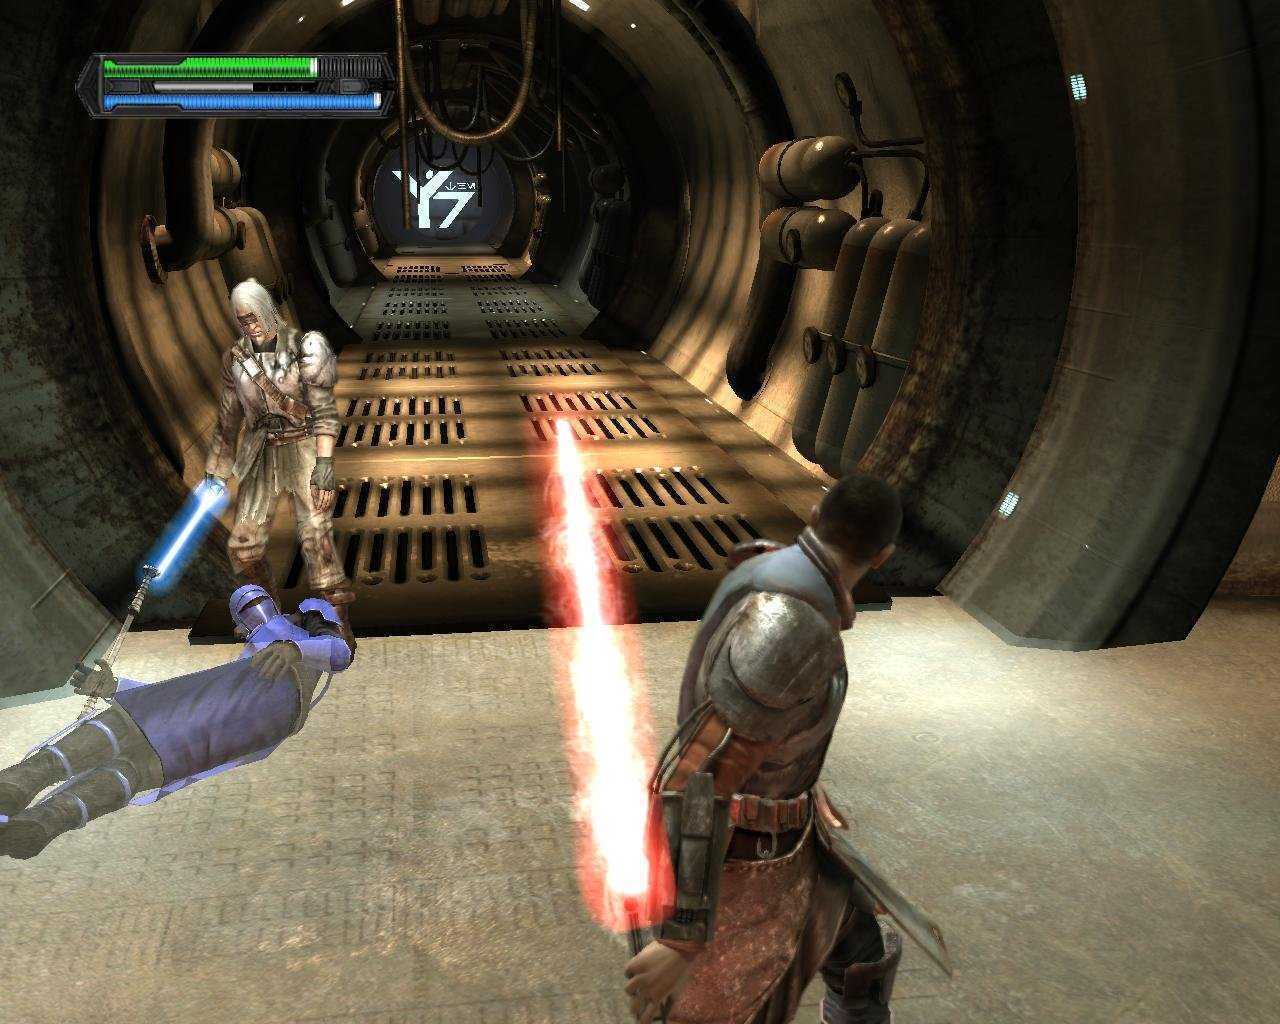 Новые игры star wars. Star Wars the Force unleashed Ultimate Sith Edition (2009). Стар ВАРС the Force unleashed 1. Игра Star Wars: the Force unleashed II. Star Wars: the Force unleashed - Ultimate Sith Edition.